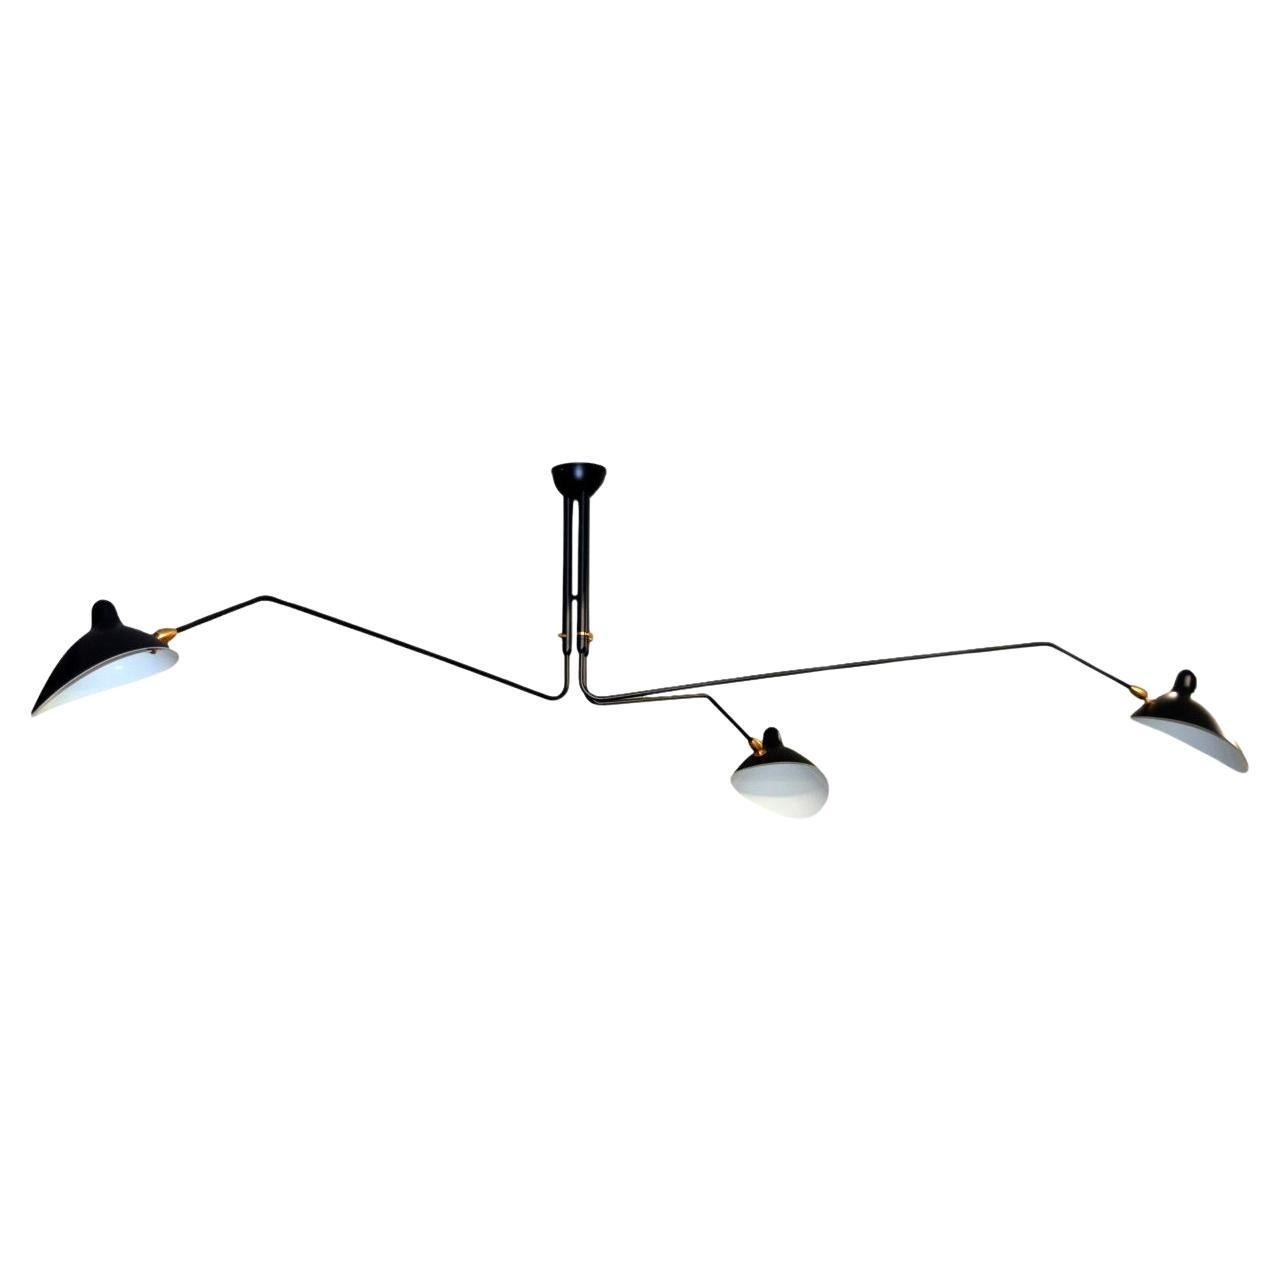 Serge Mouille - Ceiling Lamp 3 Rotating Arms - DROP, ARM LENGTH CUSTOMIZABLE! For Sale